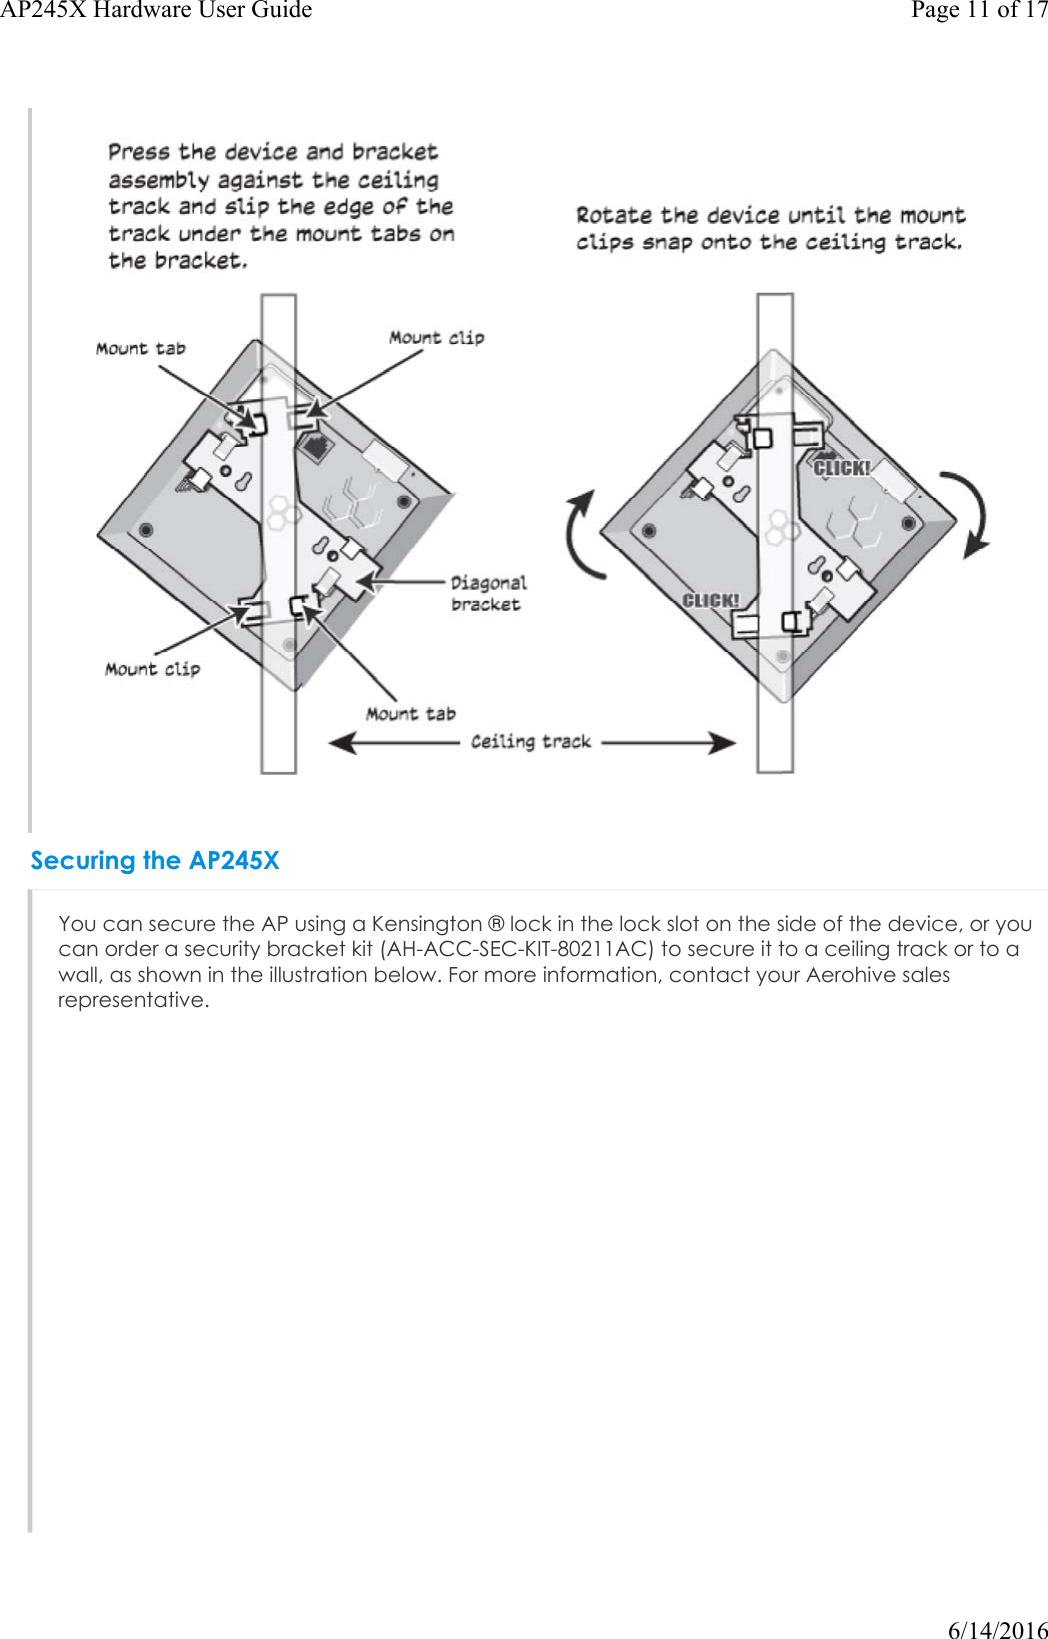 Securing the AP245XYou can secure the AP using a Kensington ® lock in the lock slot on the side of the device, or you can order a security bracket kit (AH-ACC-SEC-KIT-80211AC) to secure it to a ceiling track or to a wall, as shown in the illustration below. For more information, contact your Aerohive sales representative.Page 11 of 17AP245X Hardware User Guide6/14/2016